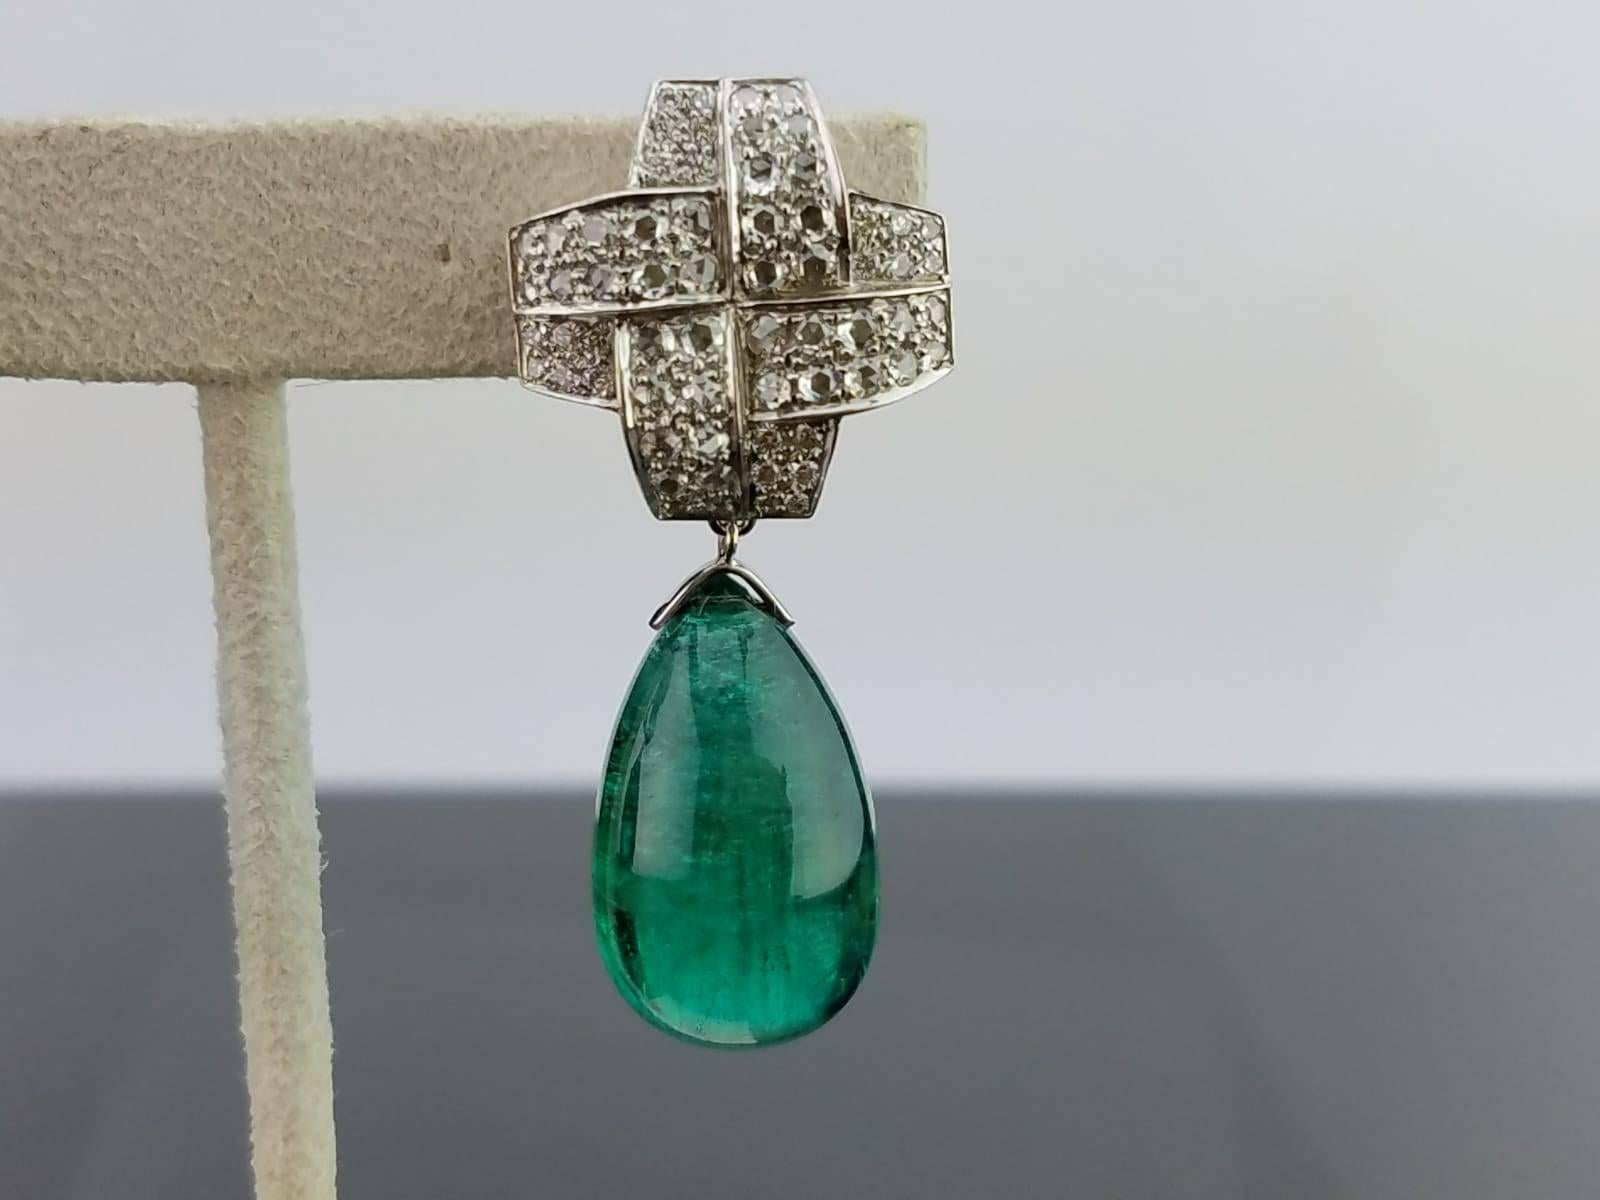 A pair of very unique drops earring with omega backing, using Emerald of great colour and clarity and Diamond set in 18K white gold.   

Stone Details: 
Stone: Zambian Emerald 
Carat Weight: 2pcs / 67.95 Carats  (around 33.5 carat each)

Diamond